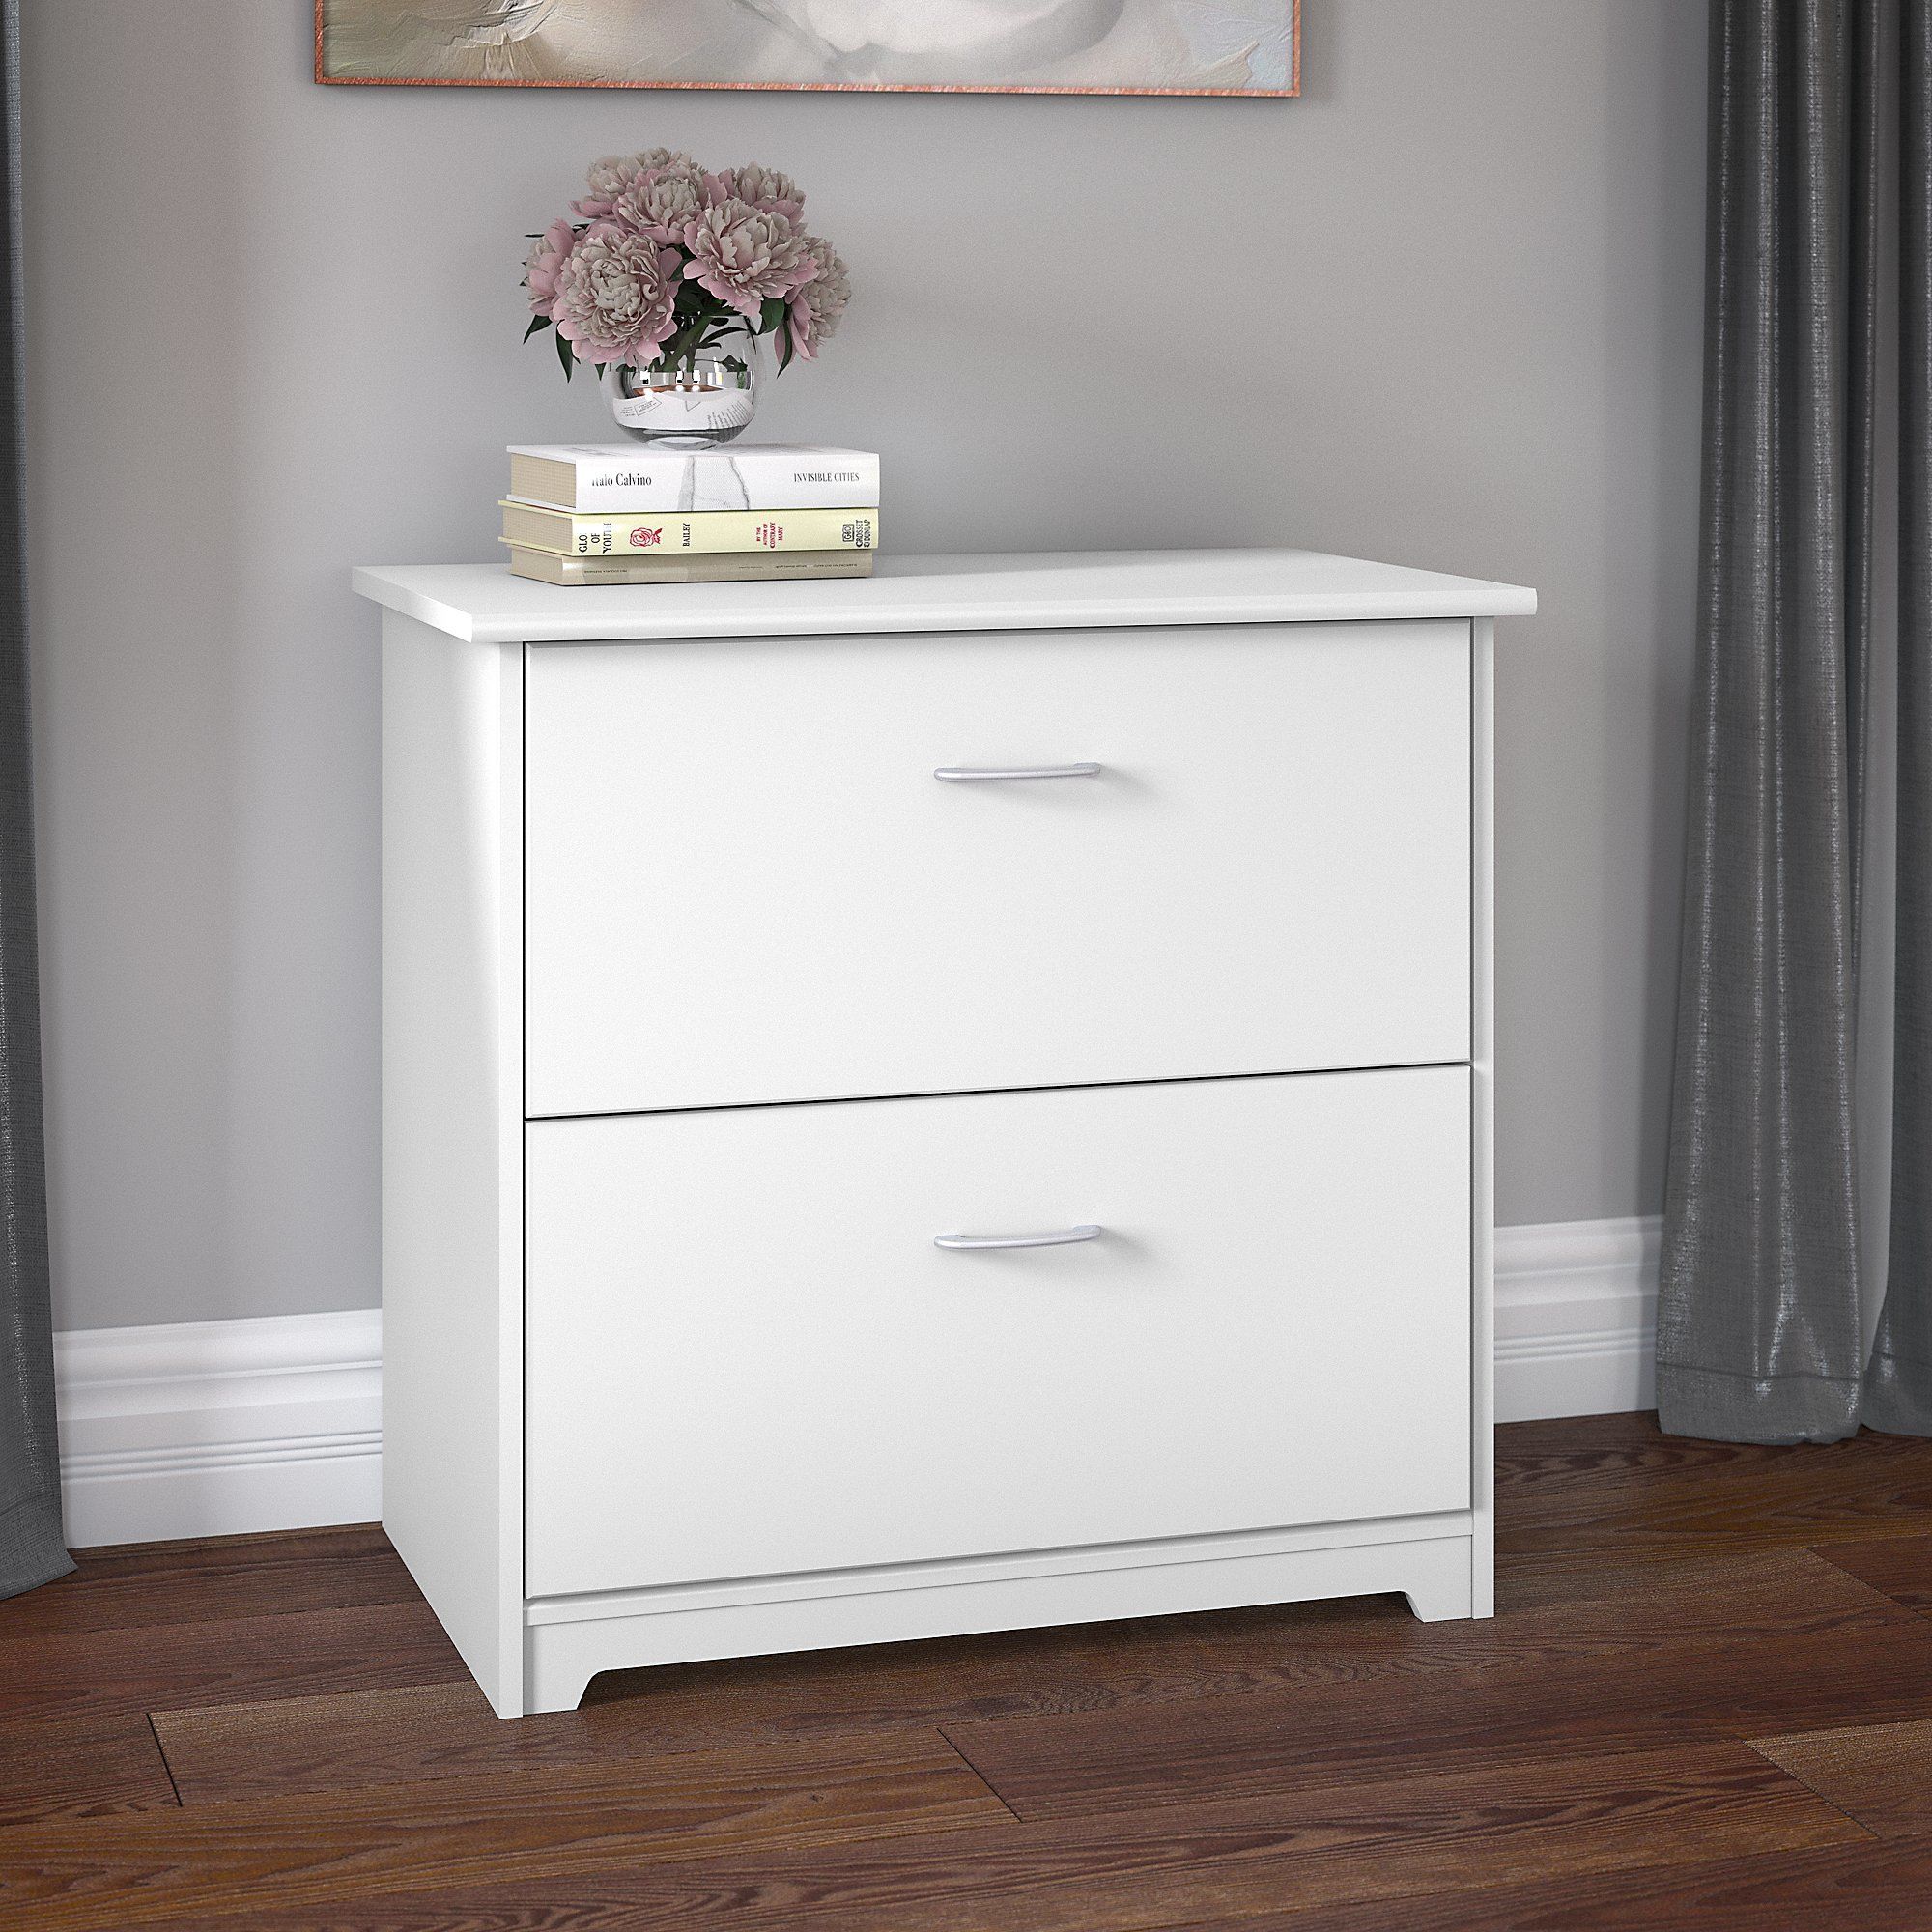 2 Drawer Lateral File Cabinet In White Regarding White Traditional Desks Hutch With Light (View 13 of 15)